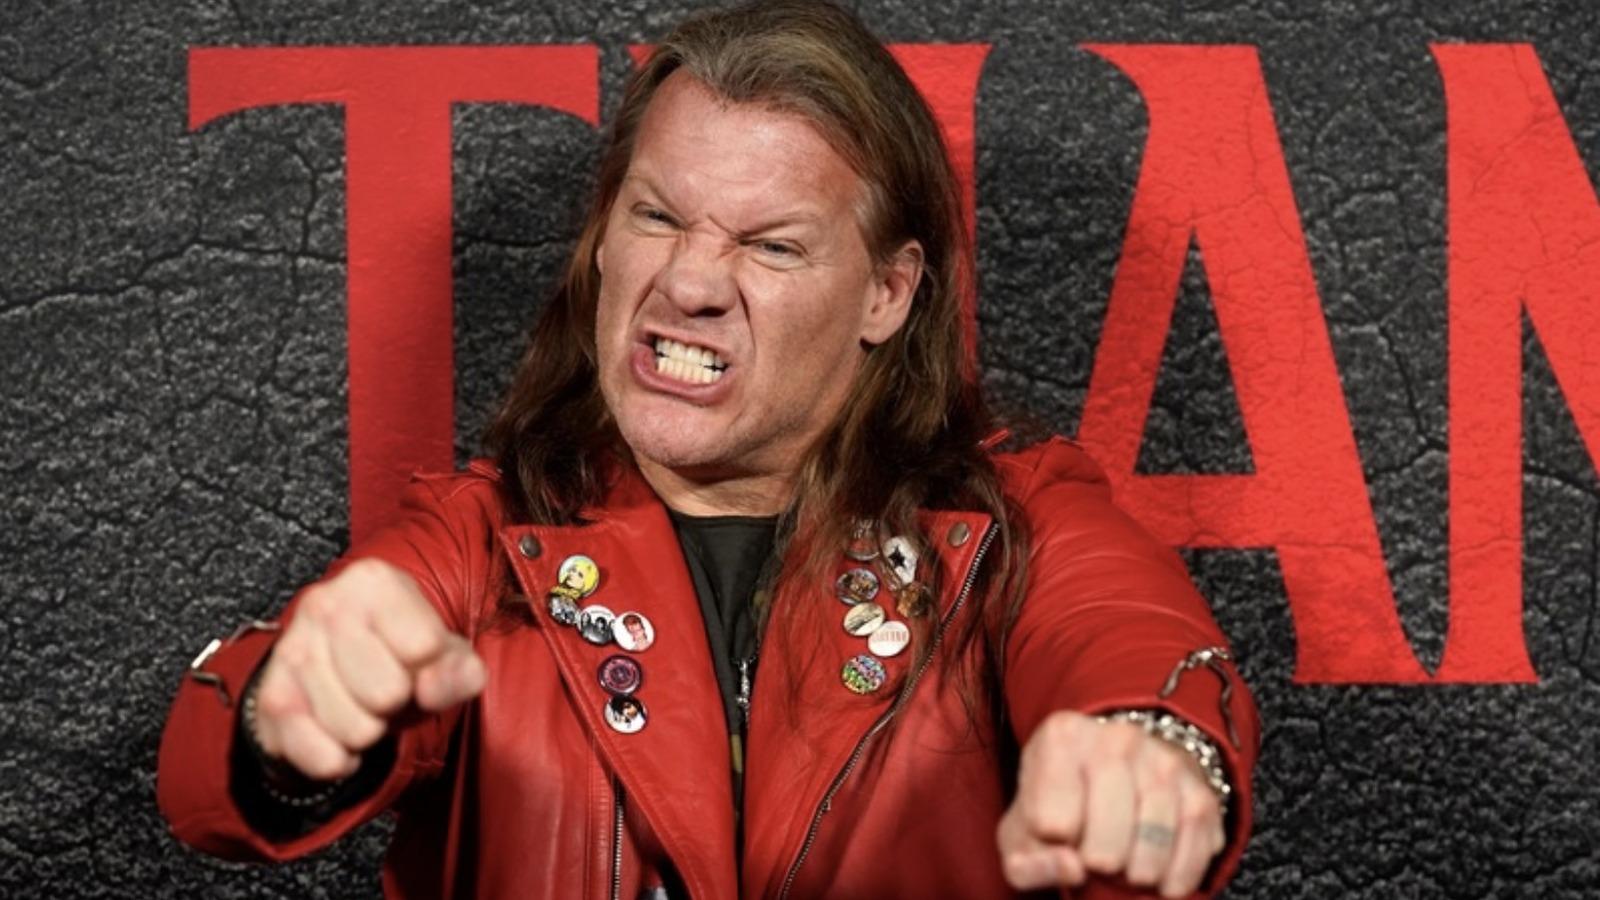 Chris Jericho is under contract with AEW, but is there a chance that he returns to the WWE?